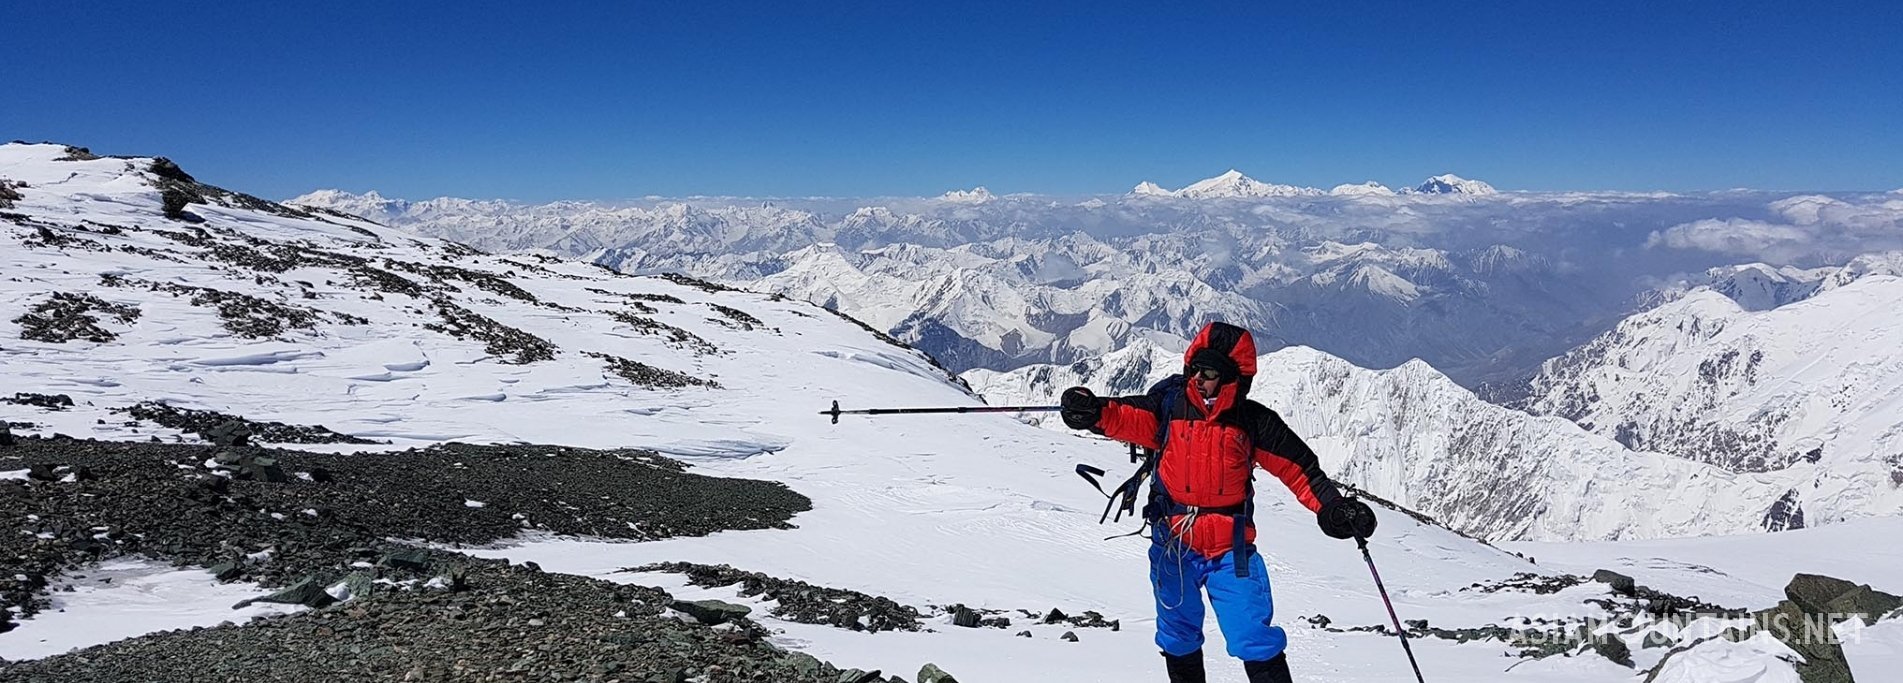 Lenin peak 2019 – ascent with Asia Mountains from airport to the summit